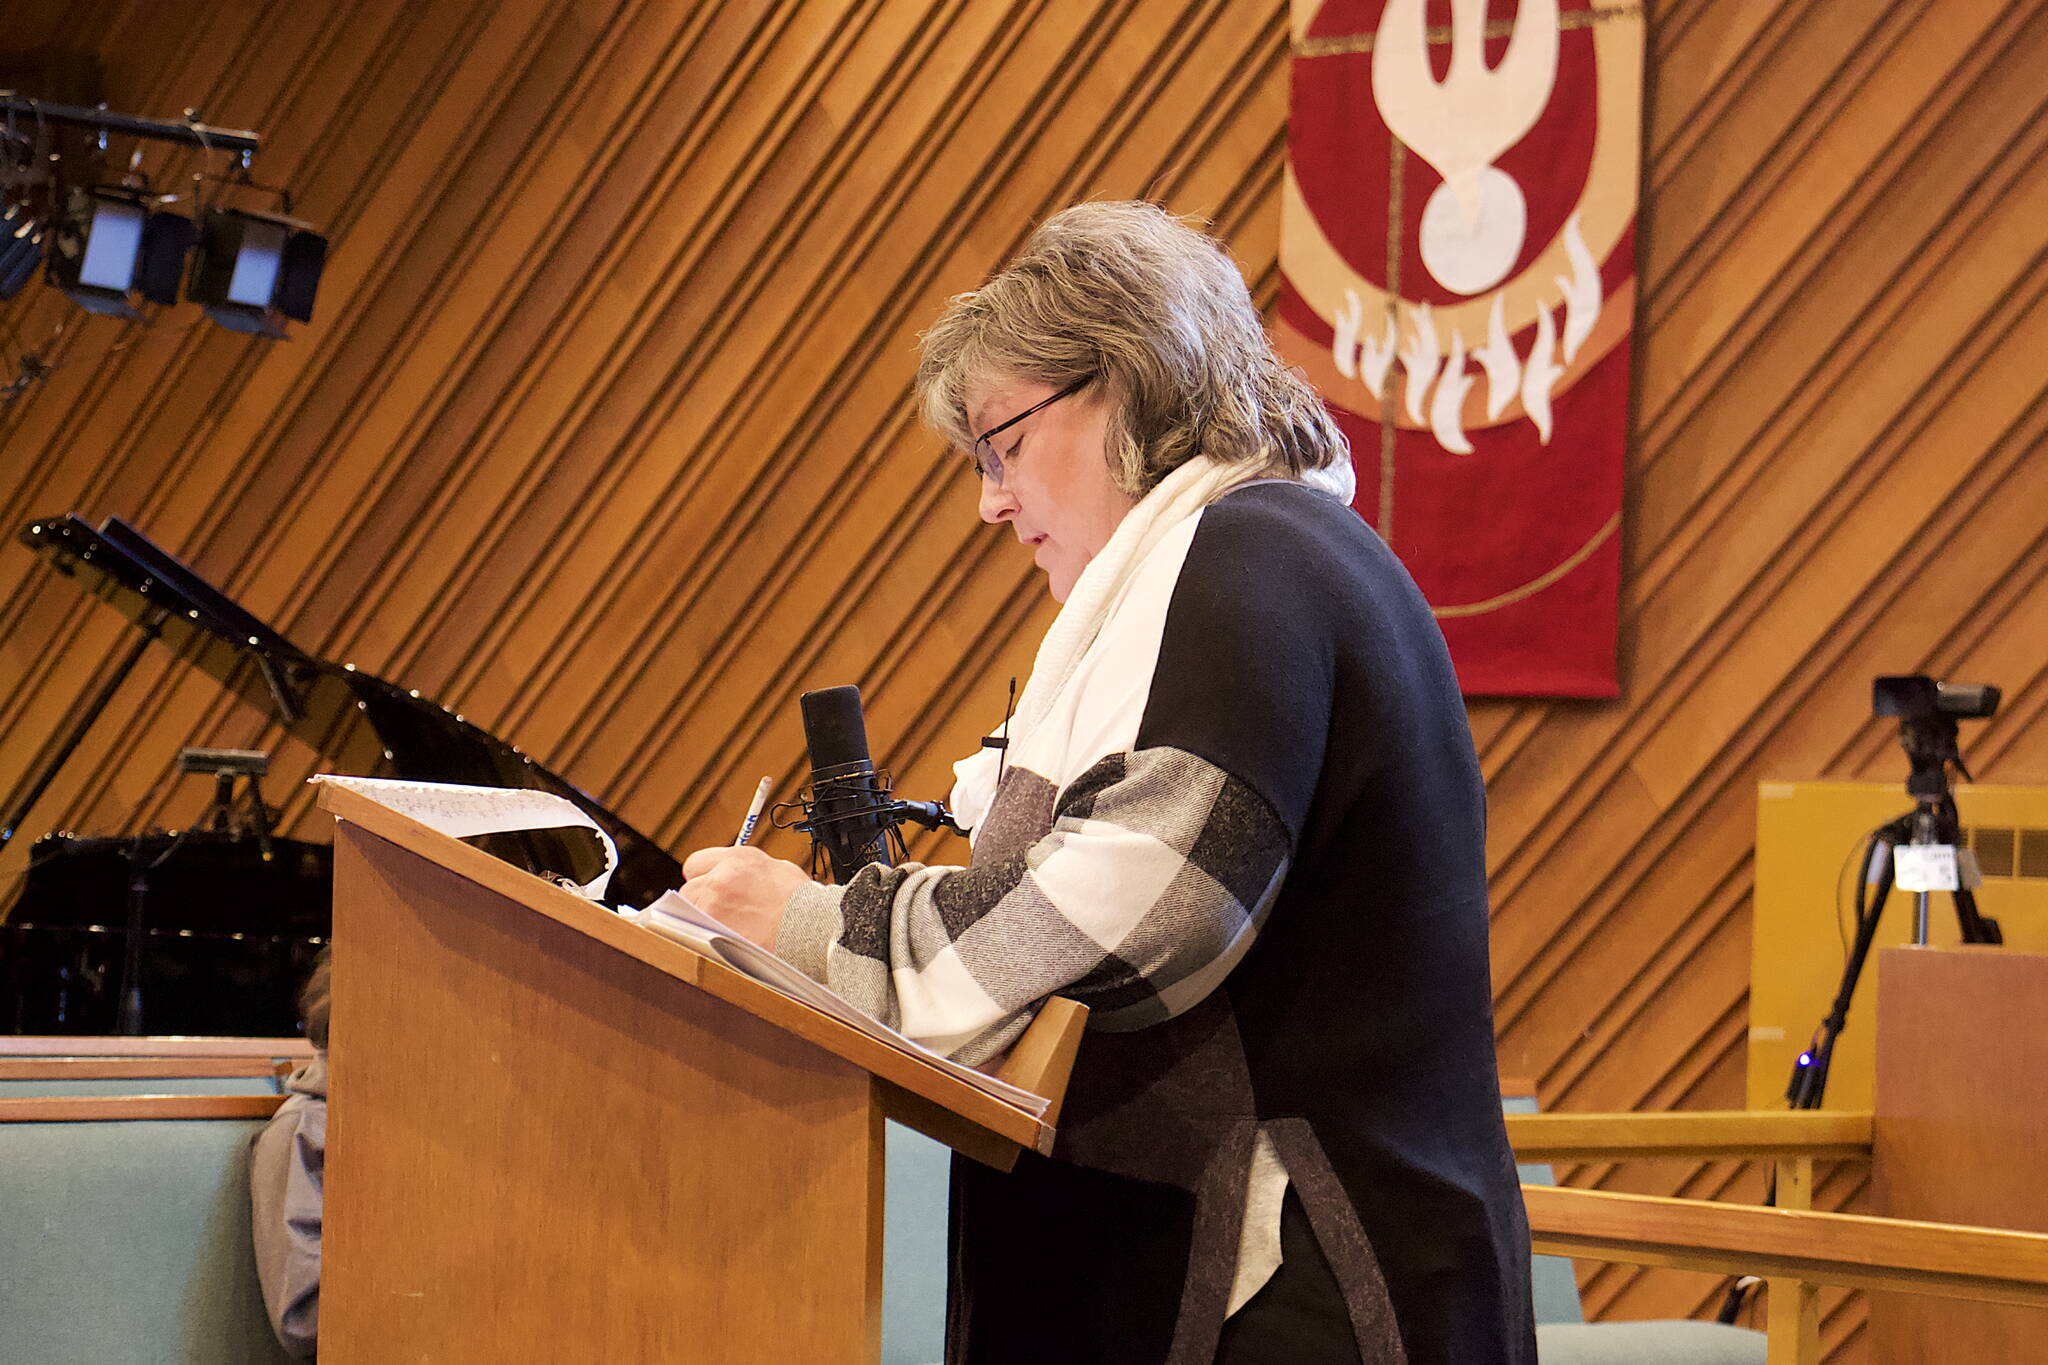 Resurrection Lutheran Church President Karen Lawfer tallies votes during a congregation meeting Sunday to determine if the church will make itself available to host the winter warming shelter again this year. (Mark Sabbatini / Juneau Empire)